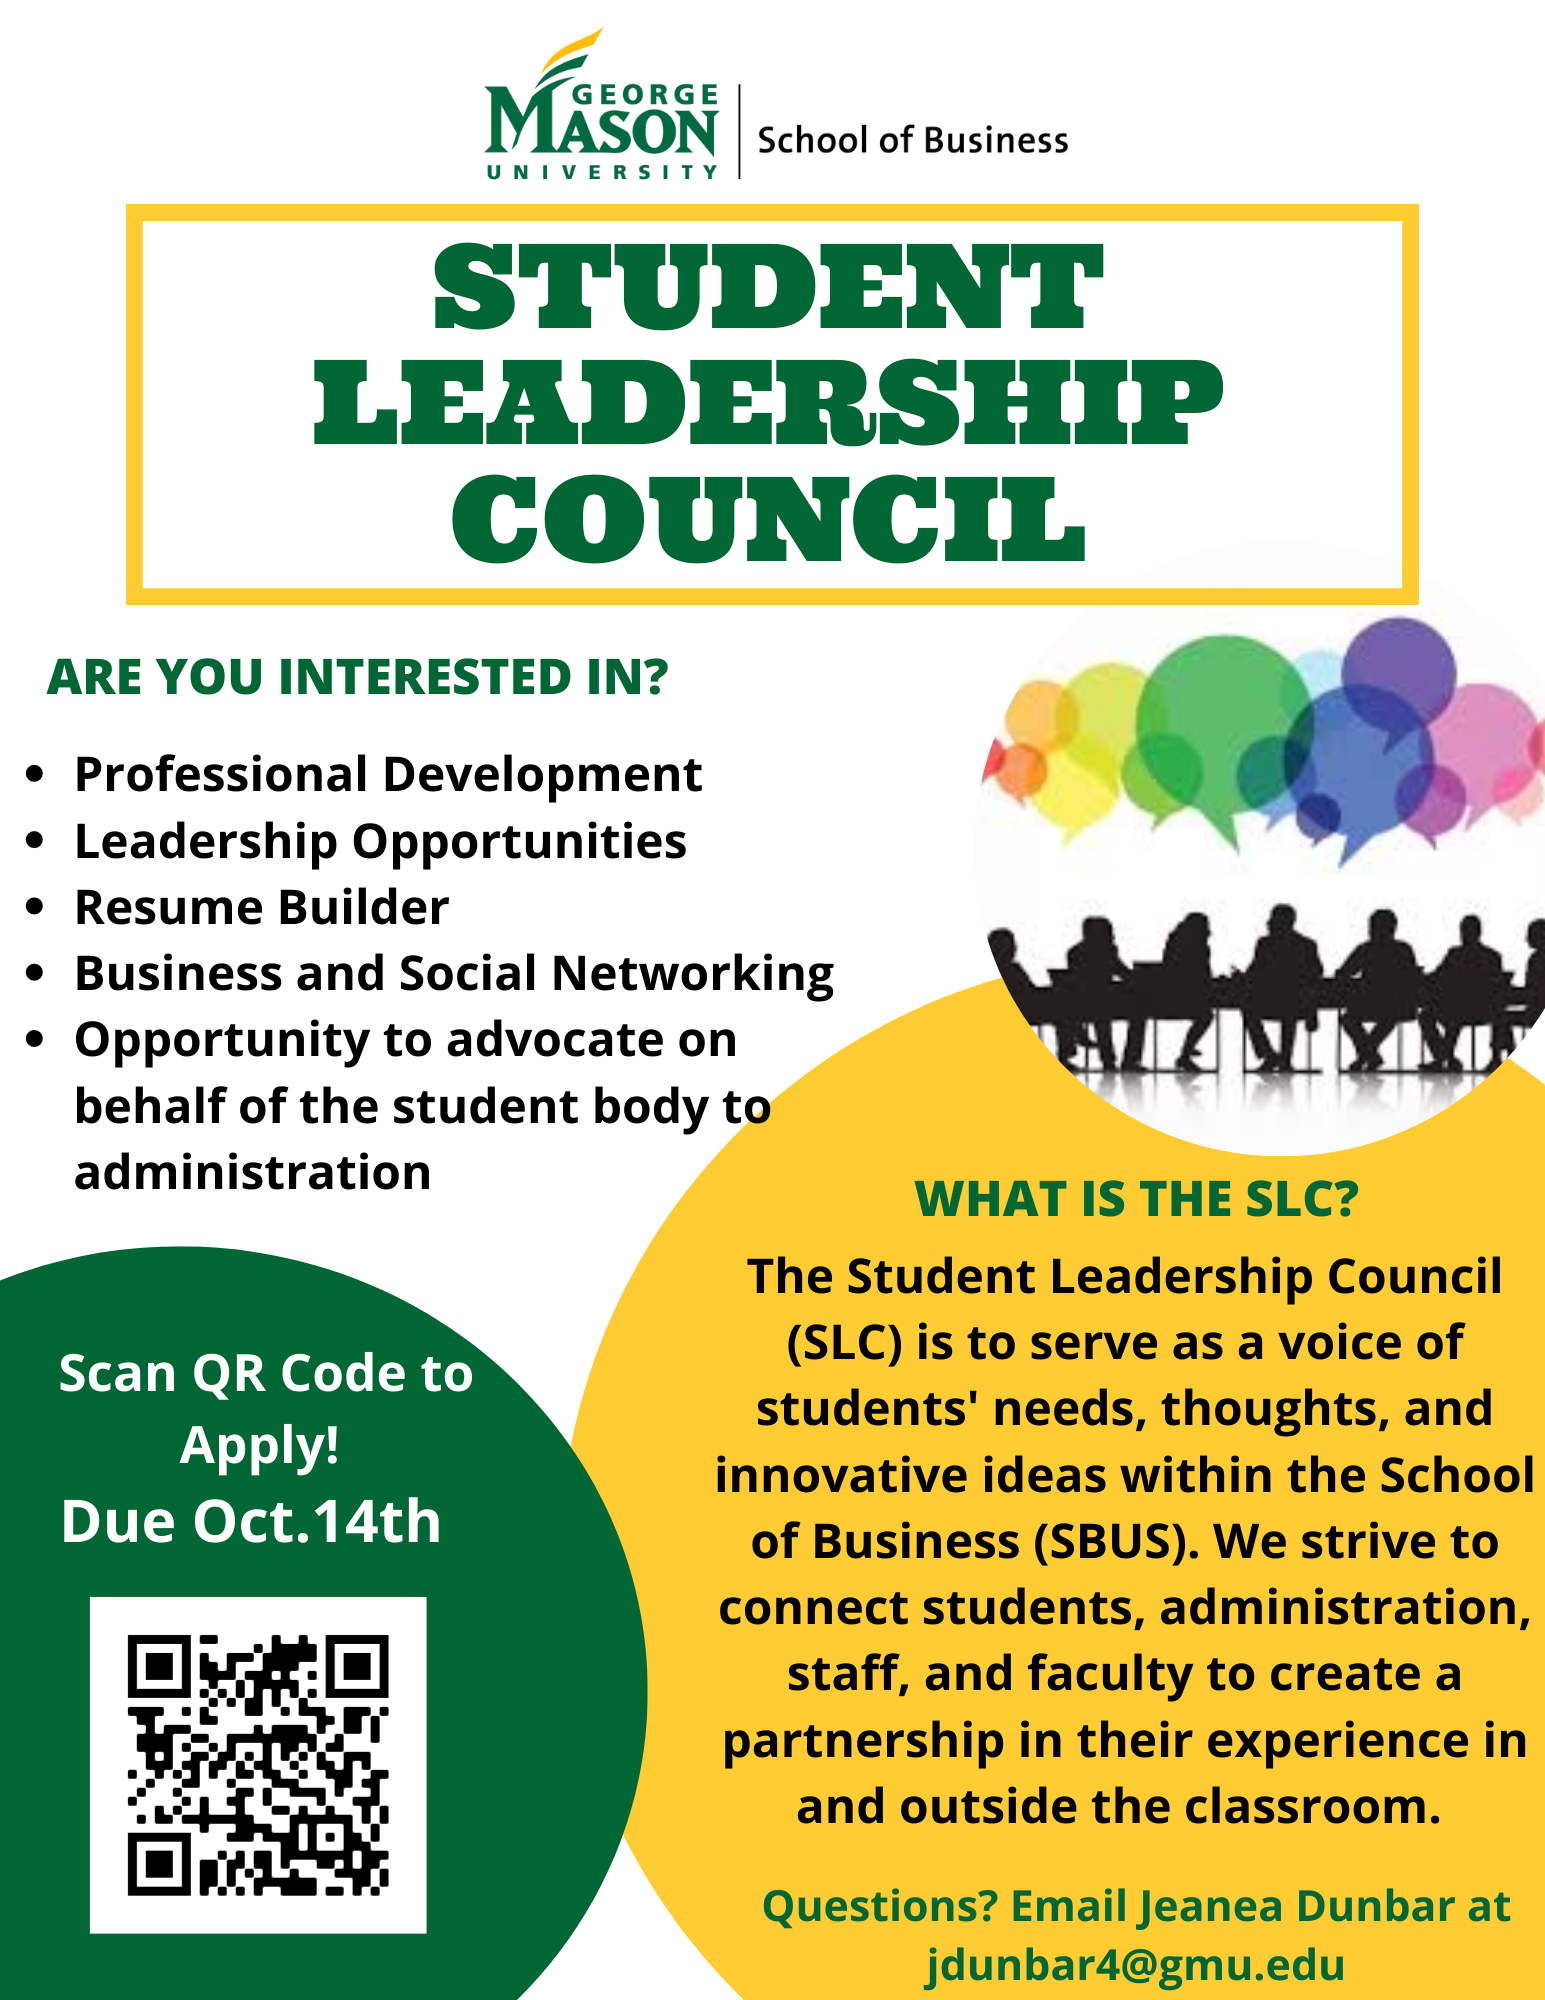 Student Leadership Council (SLC)Info Flyer. The Student Leadership Council (SLC) will serve as a voice of students' needs, thoughts, and innovative ideas within the School of Business (SBUS). Apply by October 14th.